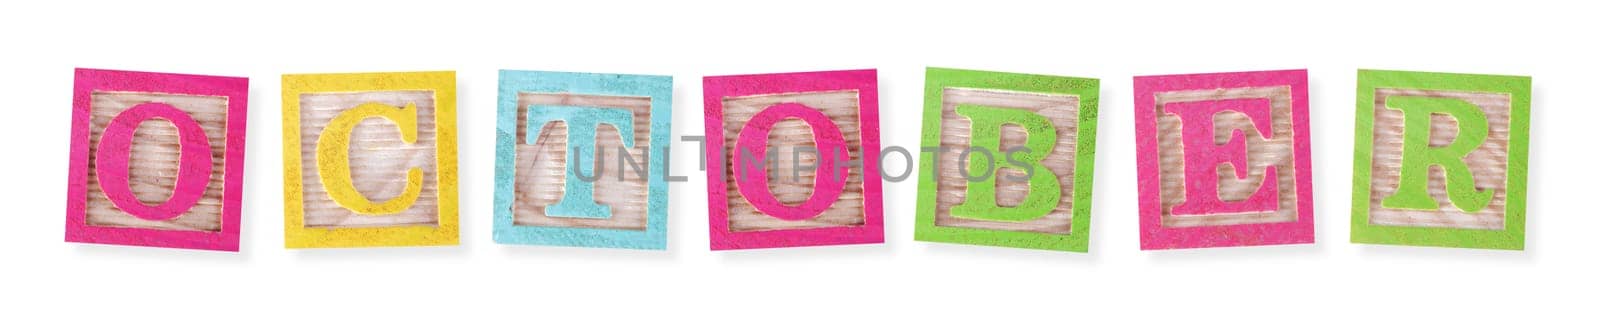 An October concept with childs wood blocks on white with clipping path to remove shadow